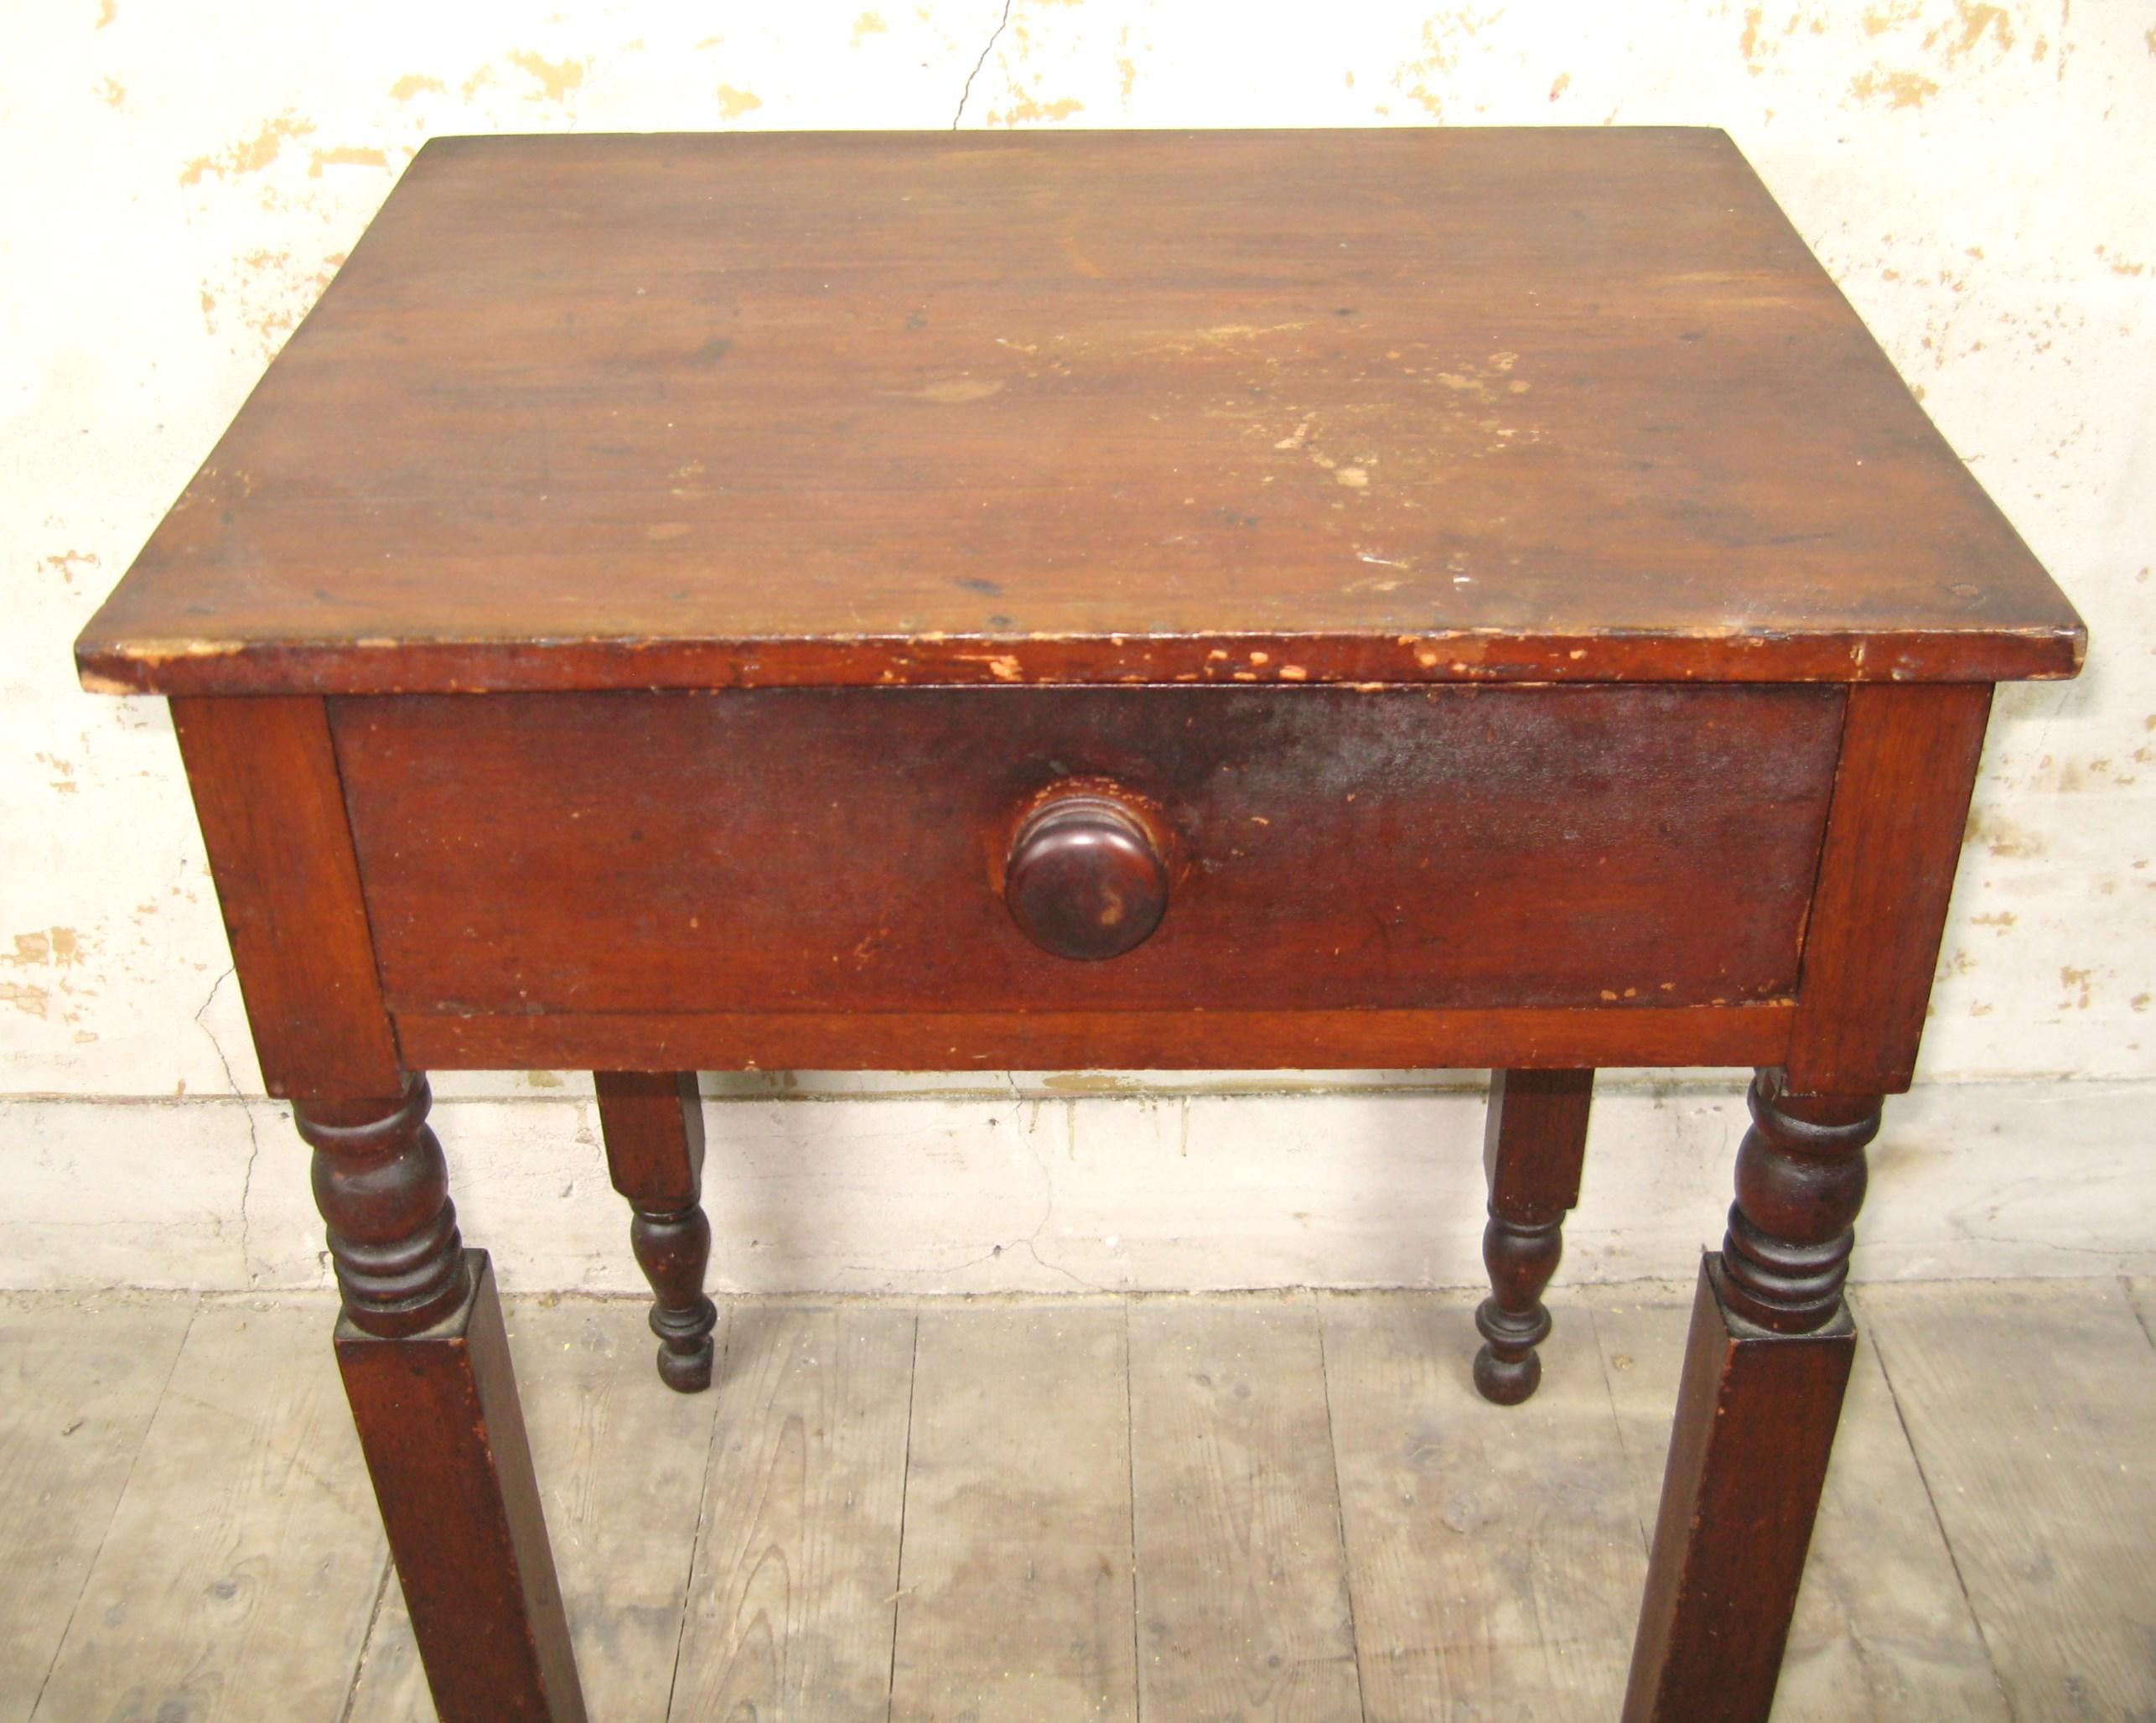 This authentic Antique Primitive Farm work table with New York Leg is a rare find for collectors and enthusiasts of historical furniture. Its great brownish color, country-style theme, and wood material make it a unique addition to any Farmhouse or